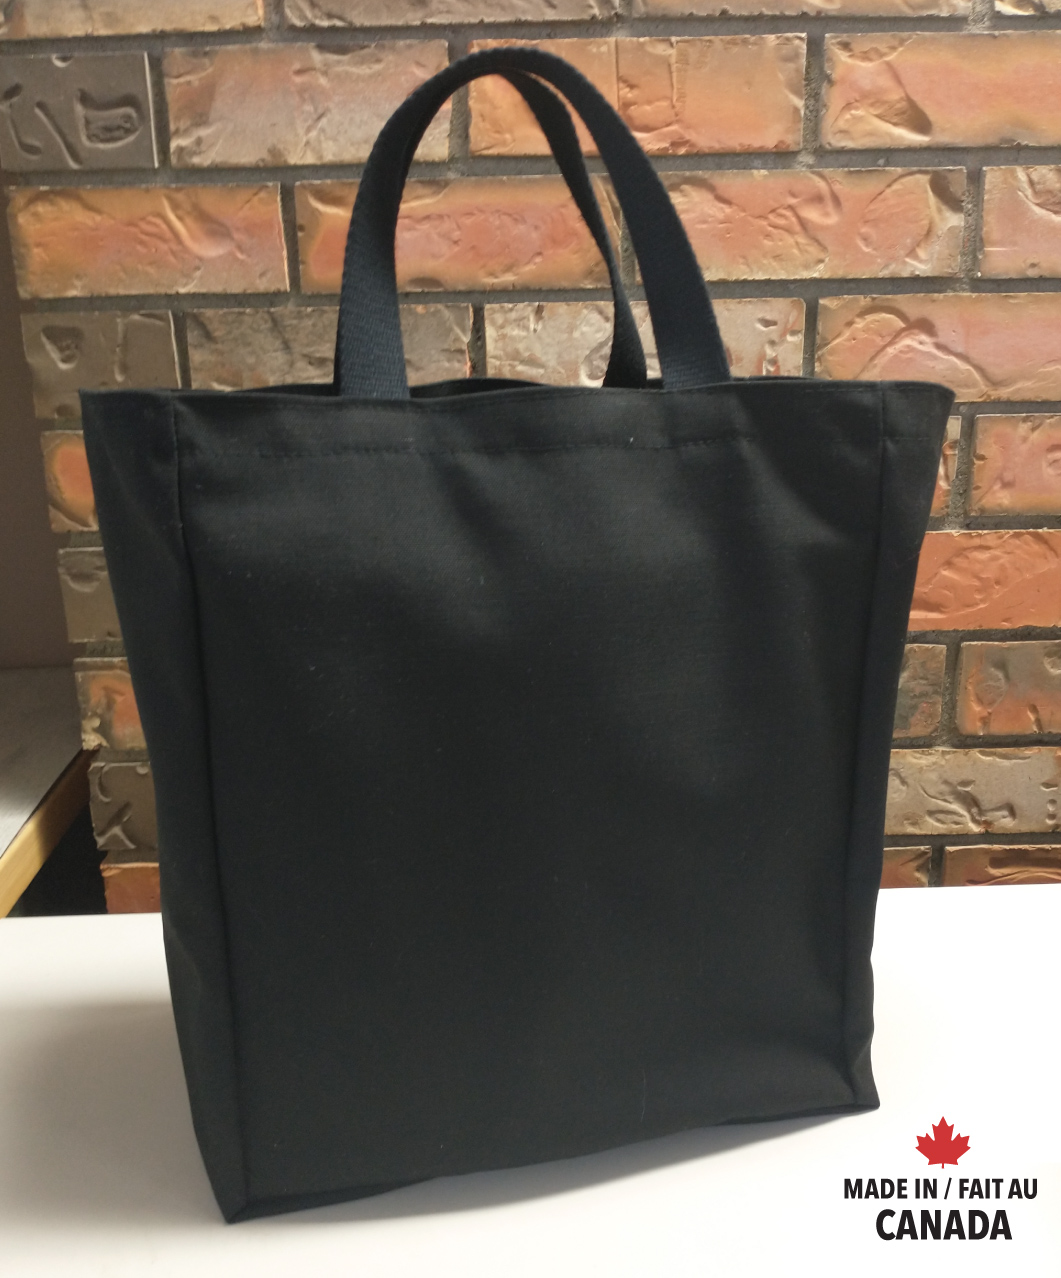 Made in Canada Cotton 6 bottle wine tote / grocery bag